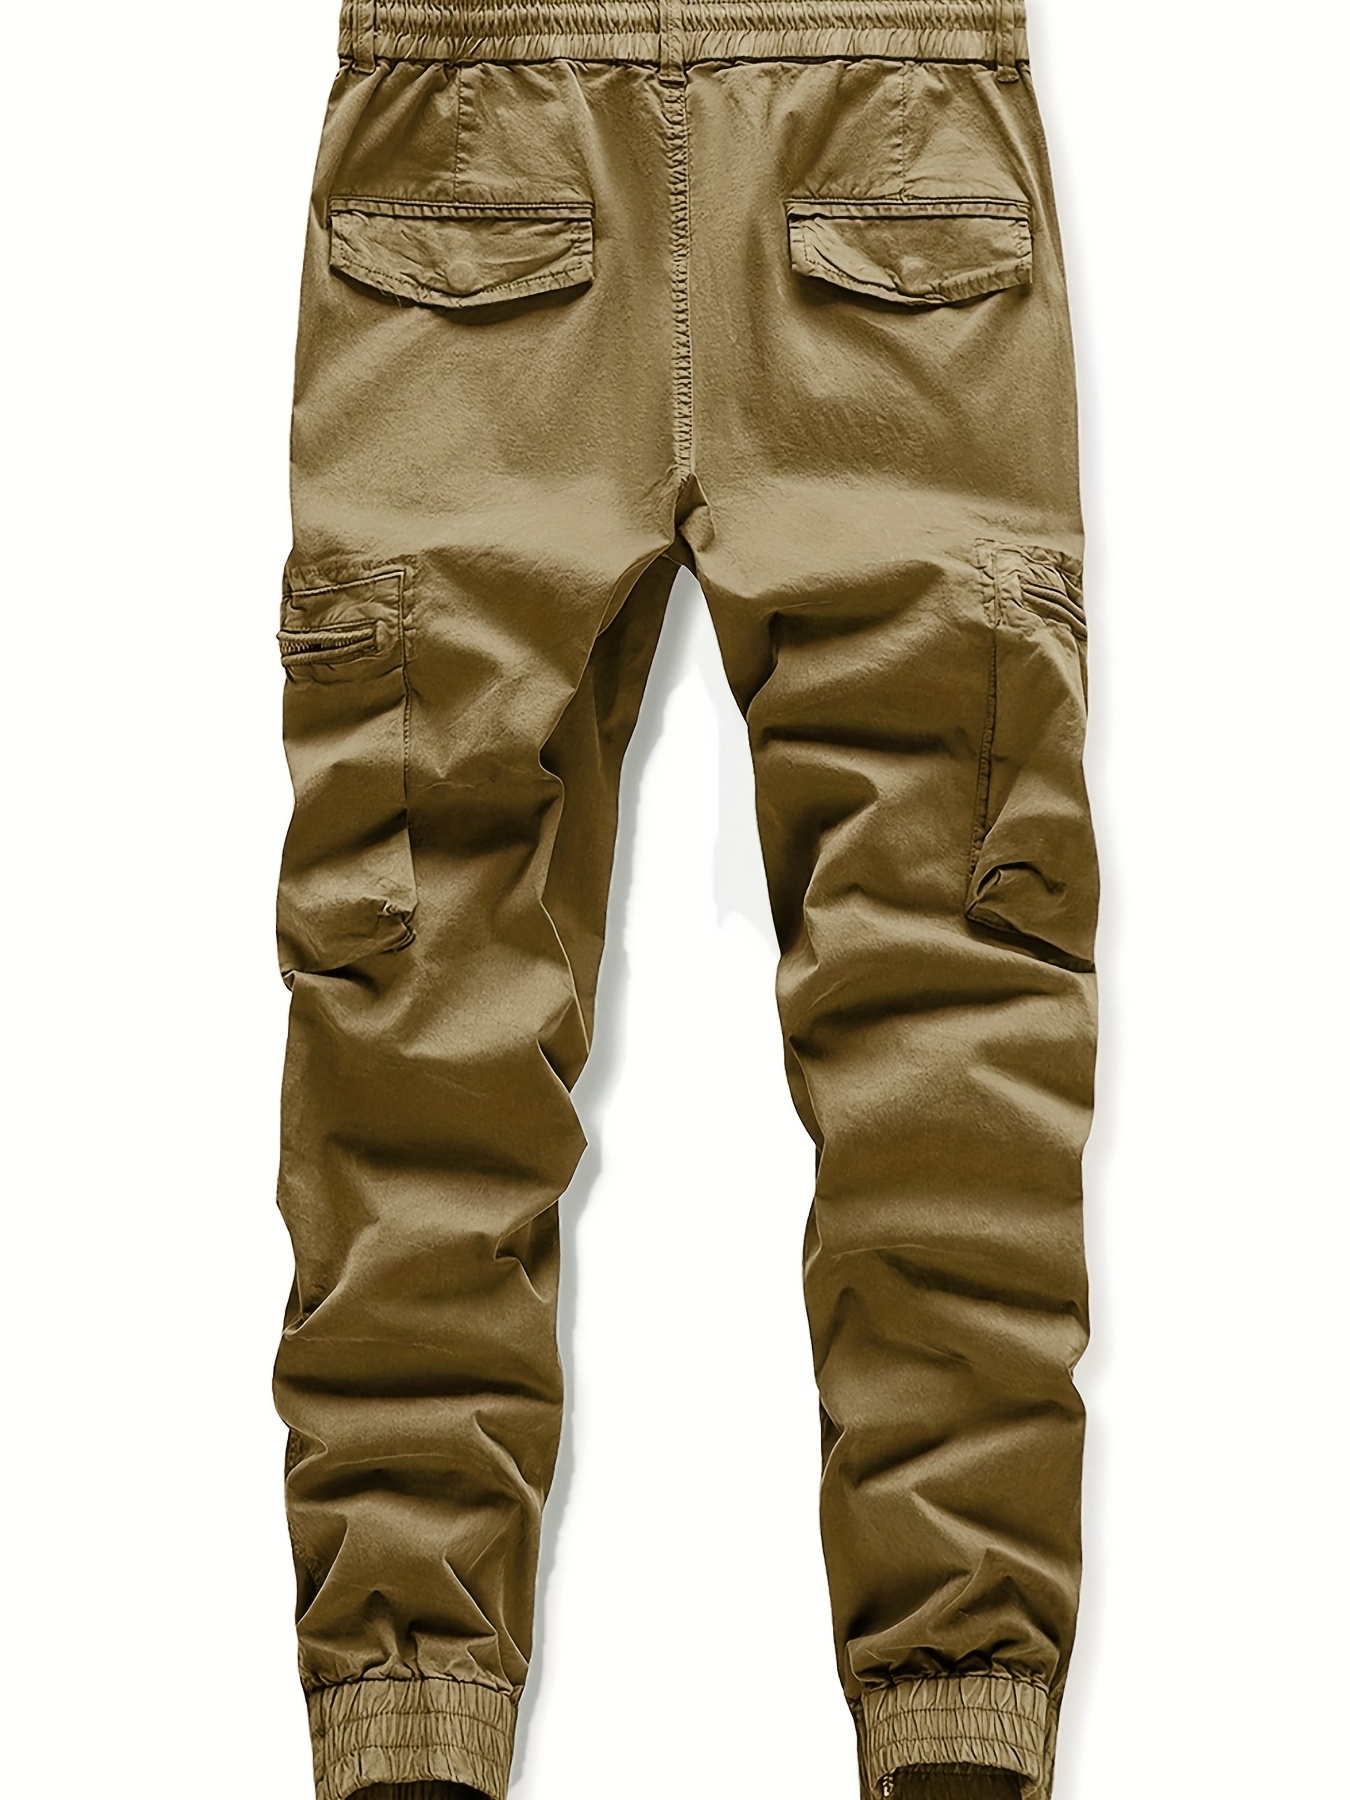 Men's Trousers Casual Tooling Cargo Pants For Men Overalls Cotton